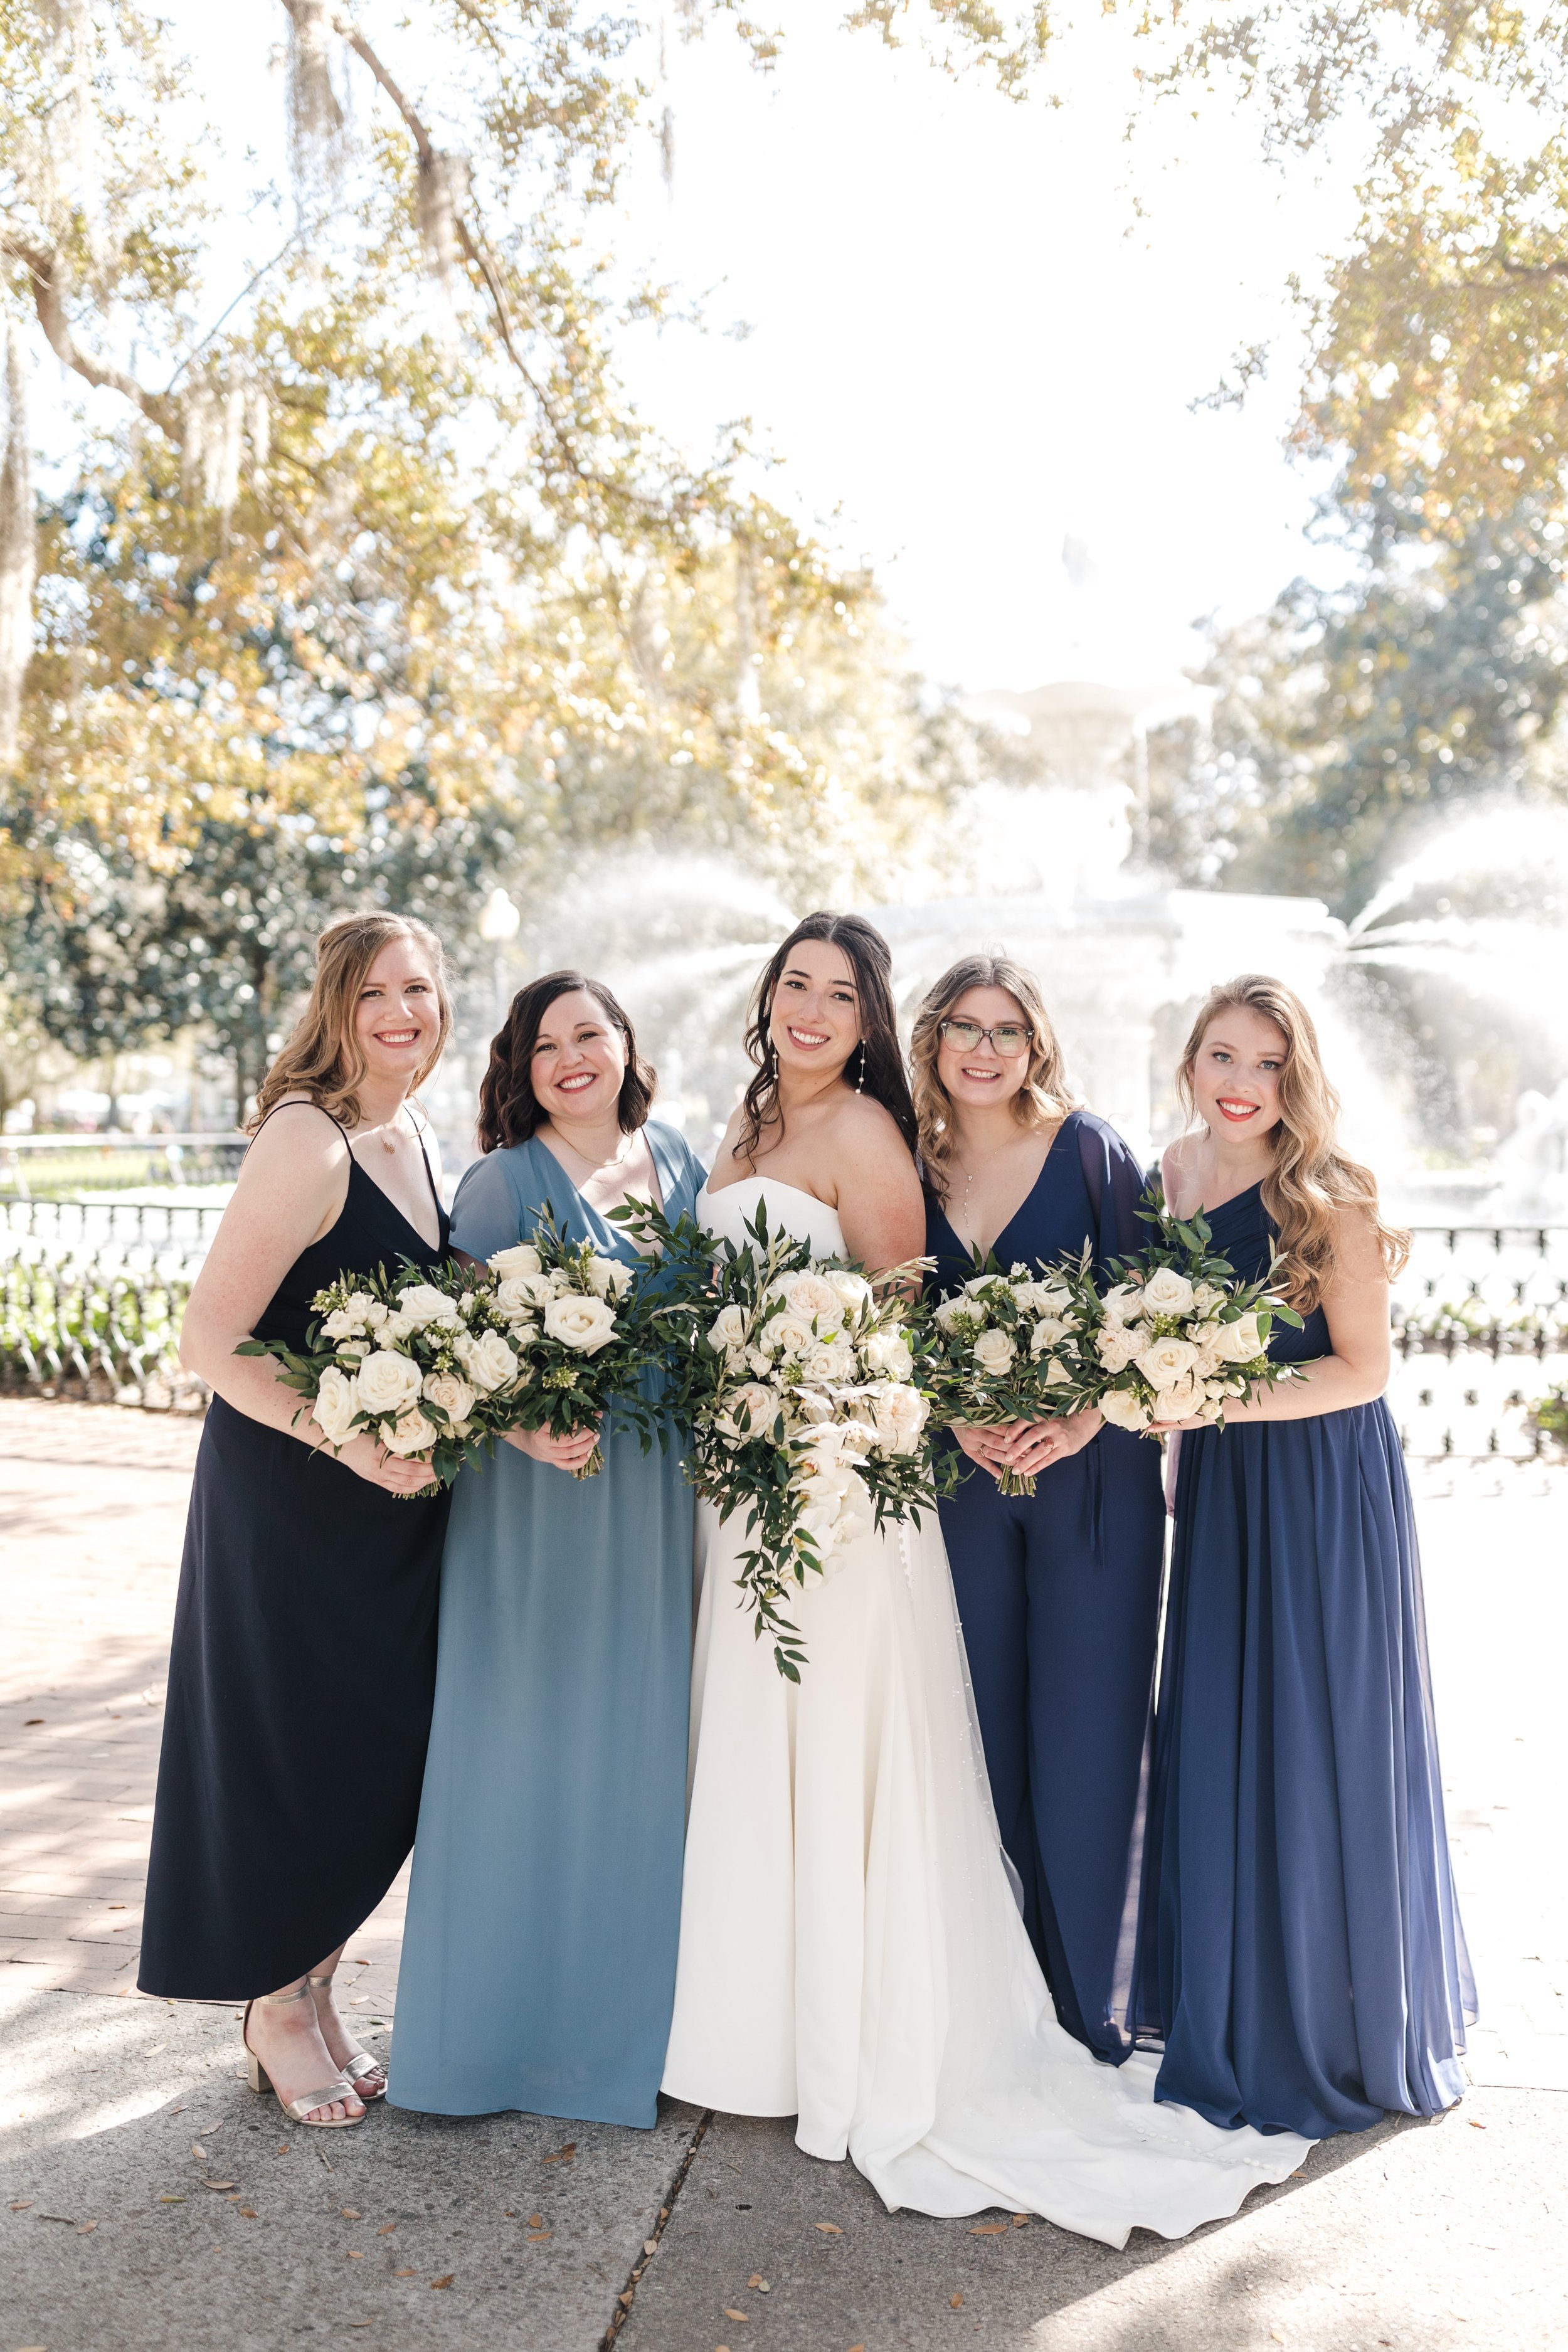 ivory-and-beau-wedding-and-florals-annelise-and-preston-wedding-blog-savannah-wedding-savannah-wedding-coordinator-savannah-florsit-wedding-florist-southern-wedding-forsyth-park-fountain-soho-south-savannah-wedding-gmp20199345-470.jpg